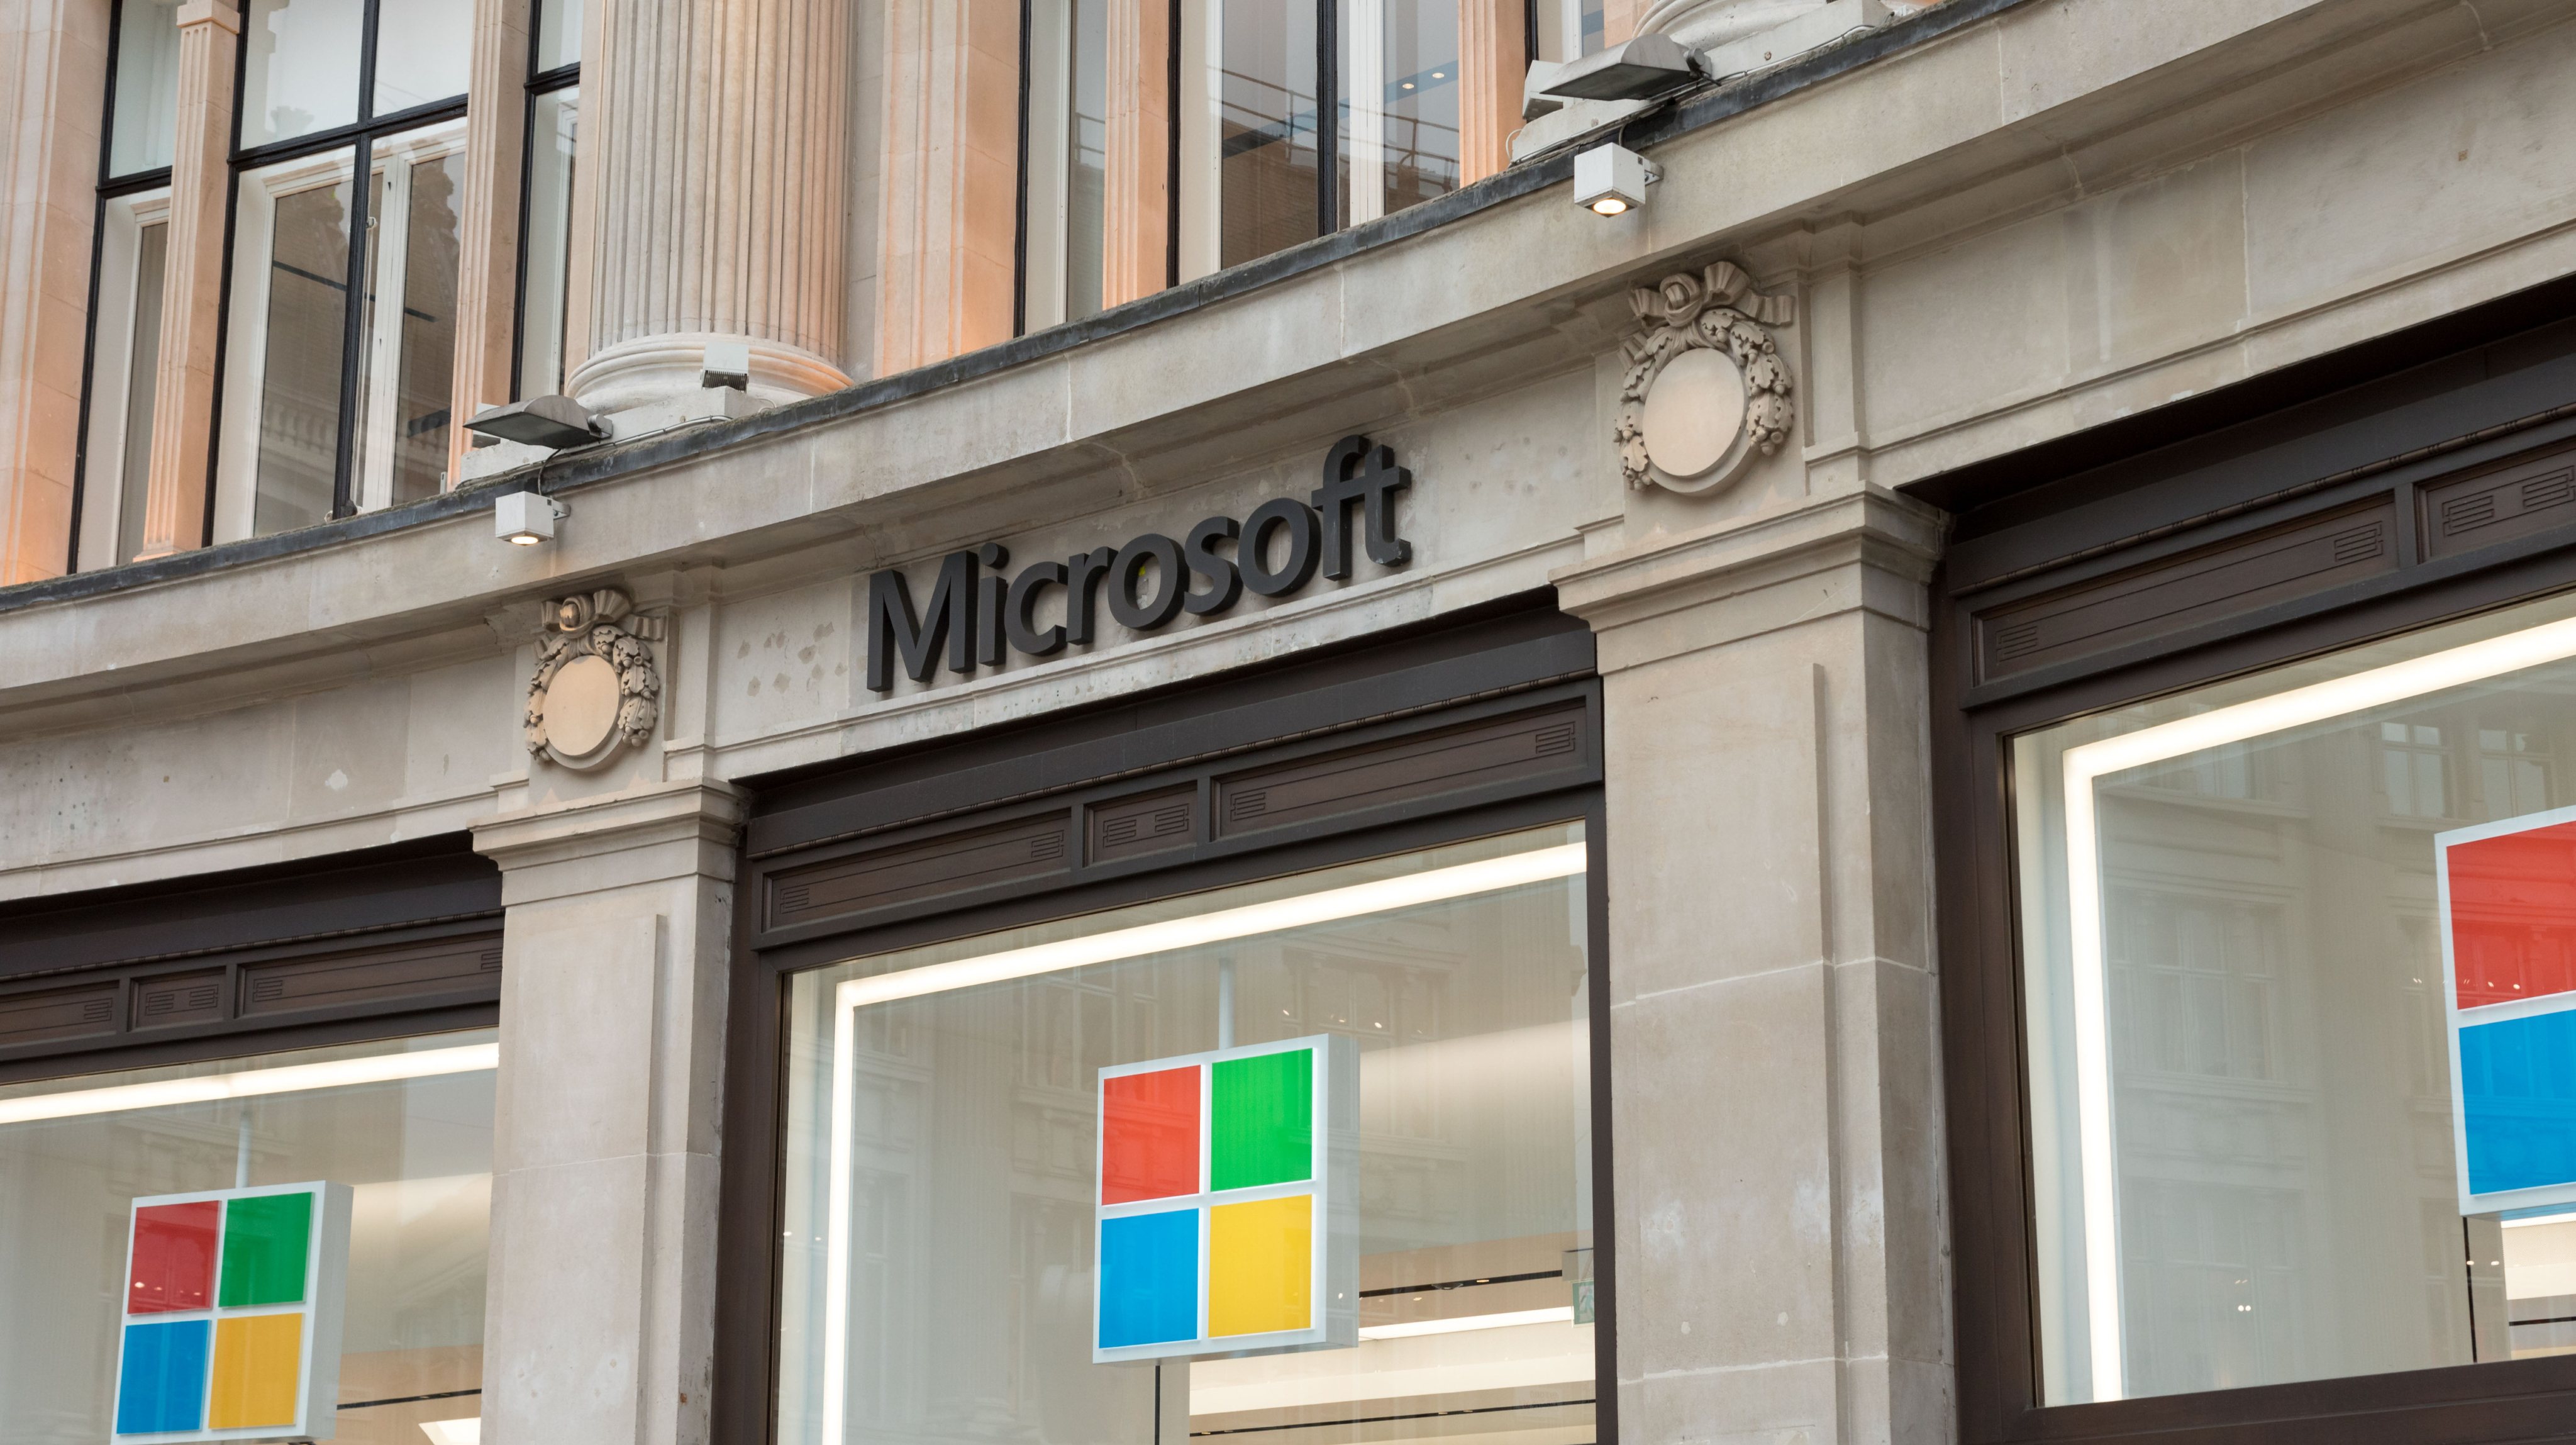 Microsoft logo is seen at one of their stores on Oxford